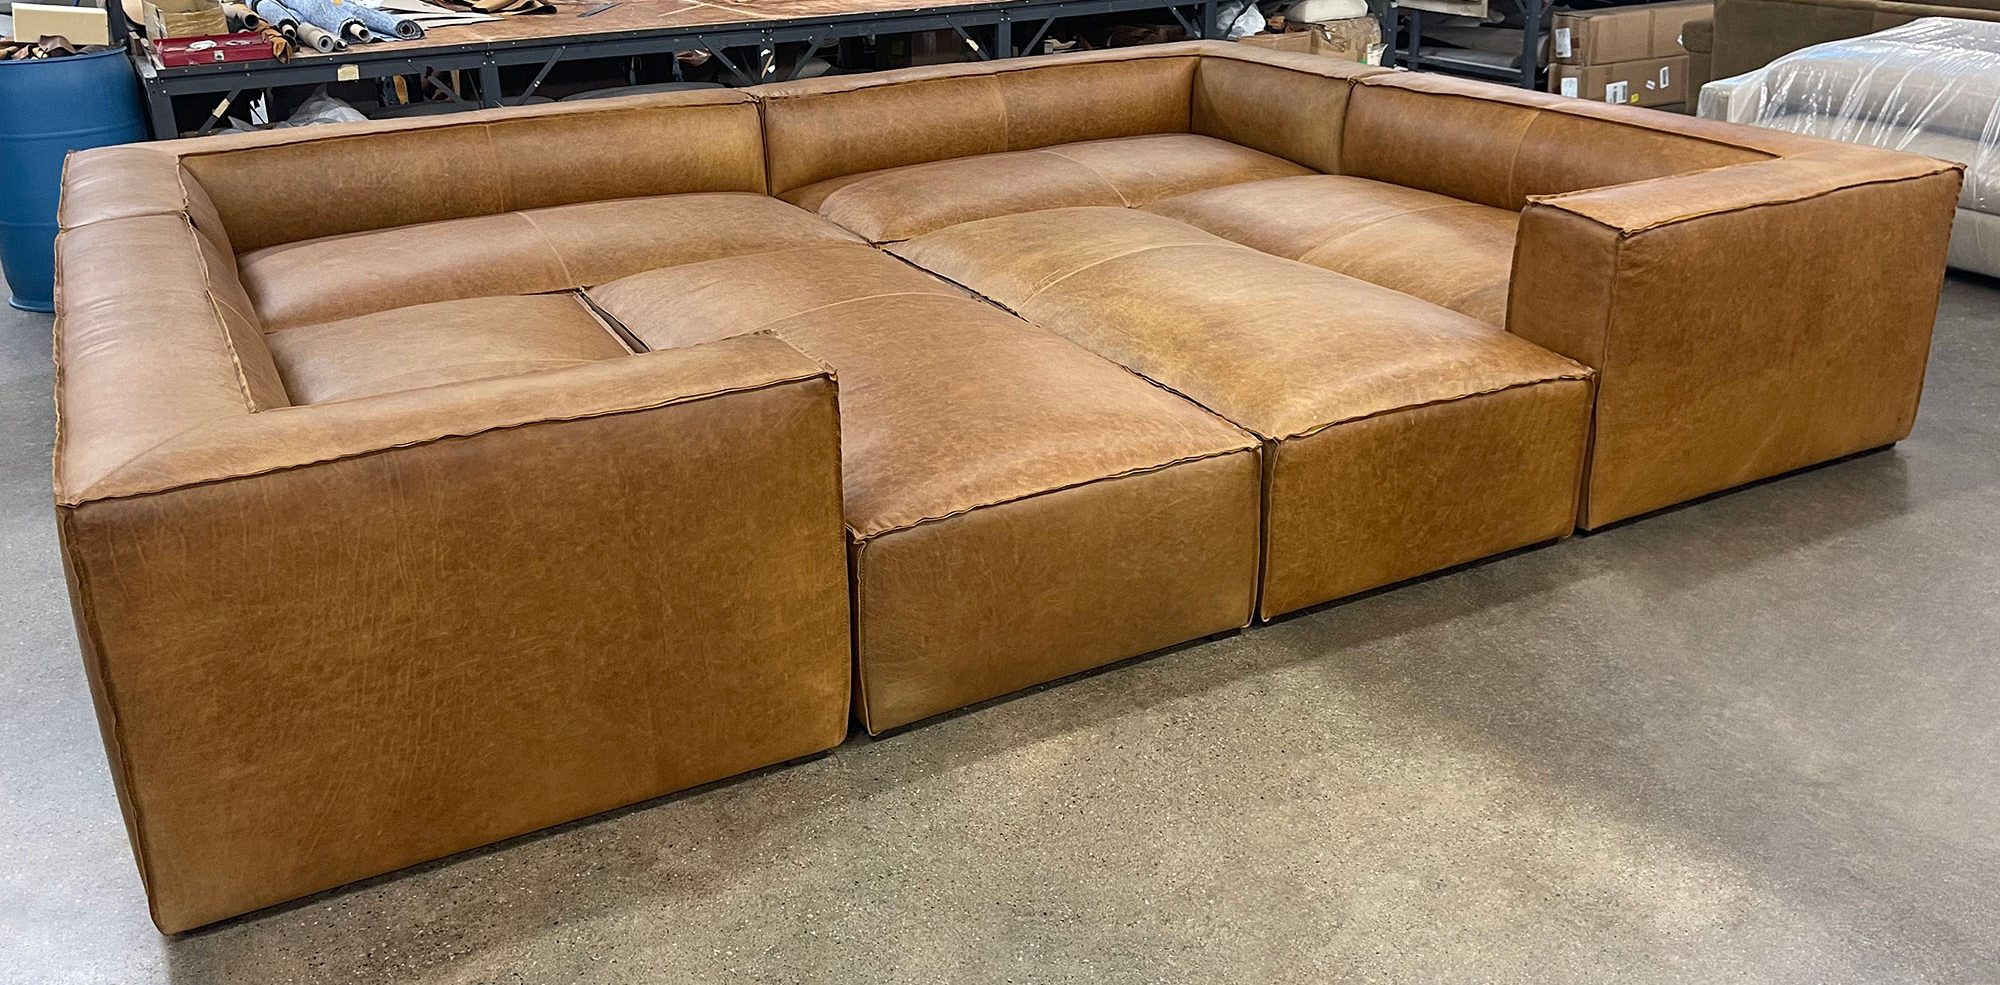 Bonham U Sectional Sofa with Full Fit Ottomans in Berkshire Chestnut - LAF front angle